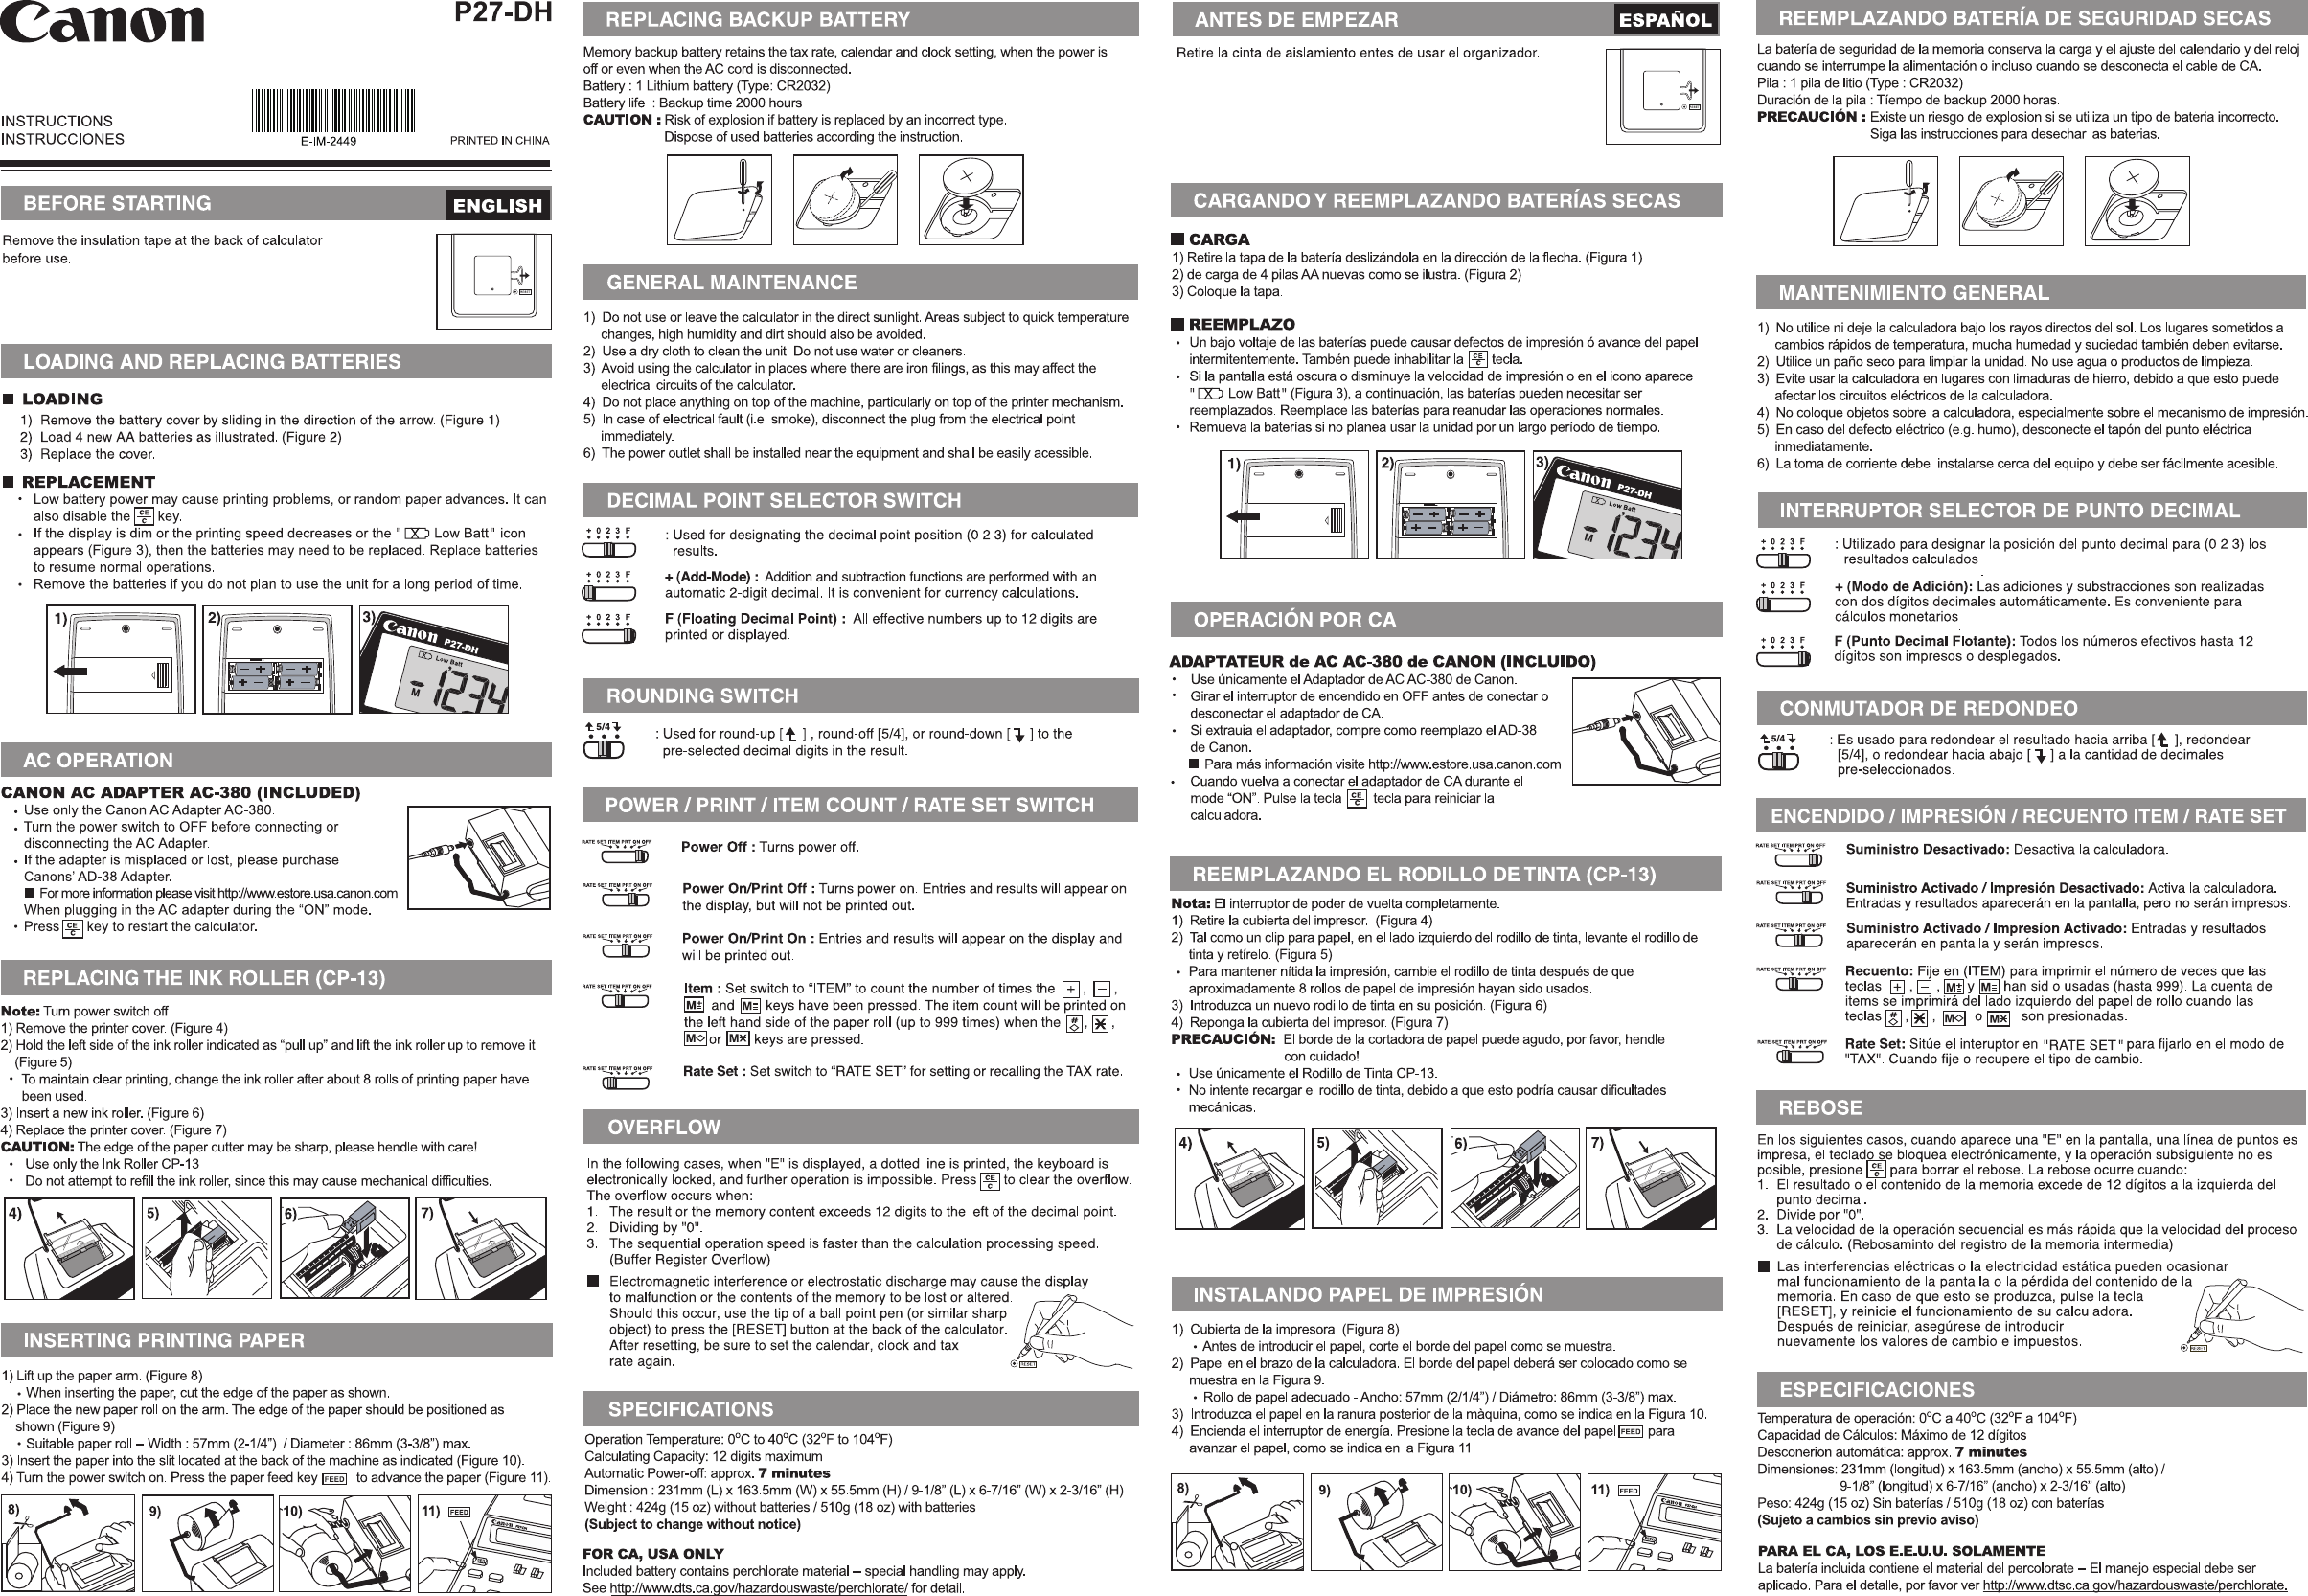 Page 1 of 2 - Canon P27-DH USA GB Front - 2 User Manual  To The D9874b4a-4cae-4aeb-abc1-c3b3a150cfbb